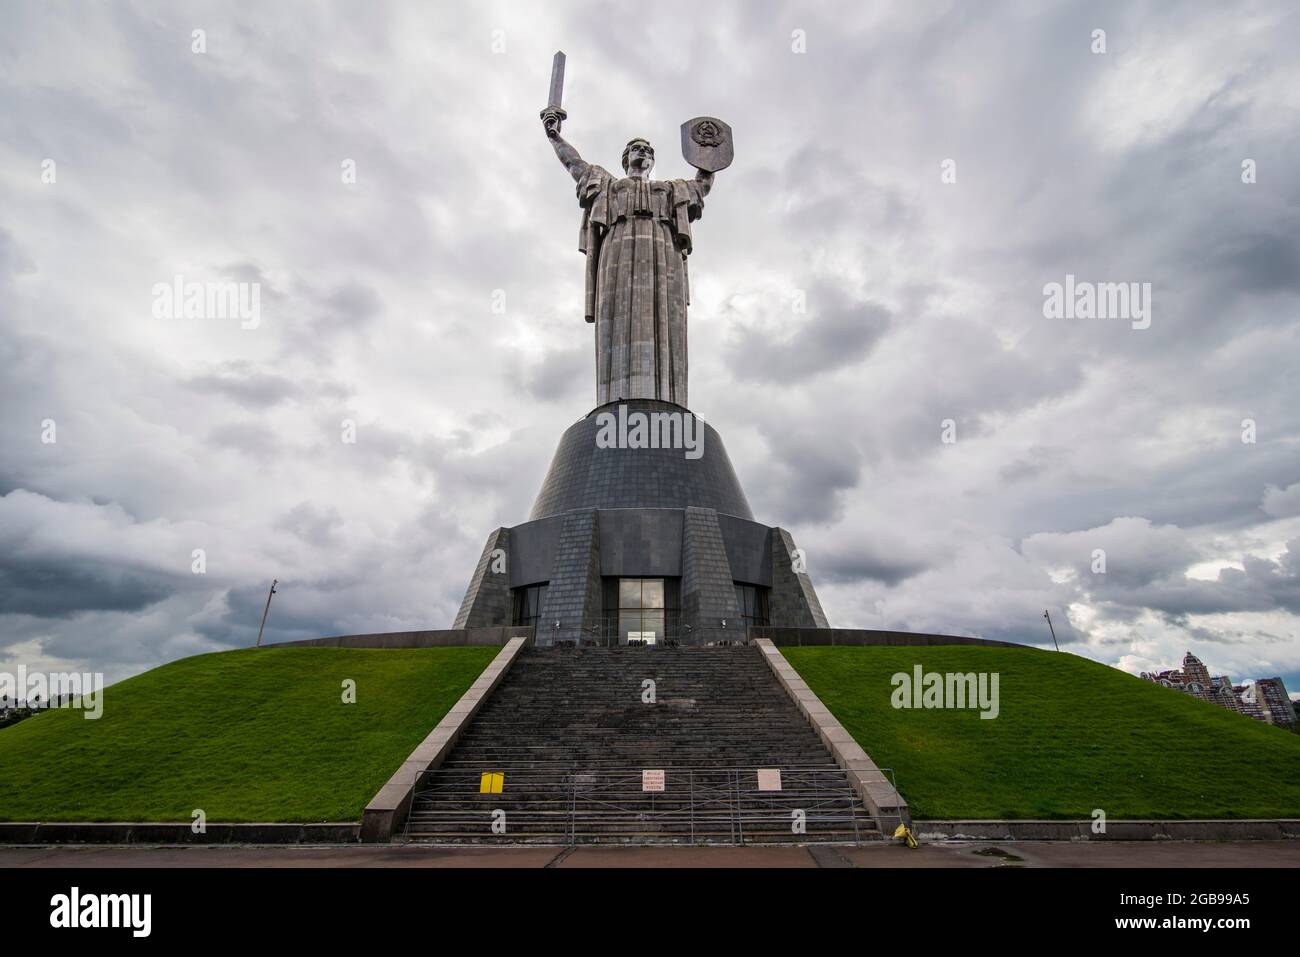 Rodina Mat and the museum of the great partiotic war undeneath overlooking Kiew or Kyiv capital of the Ukraine Stock Photo